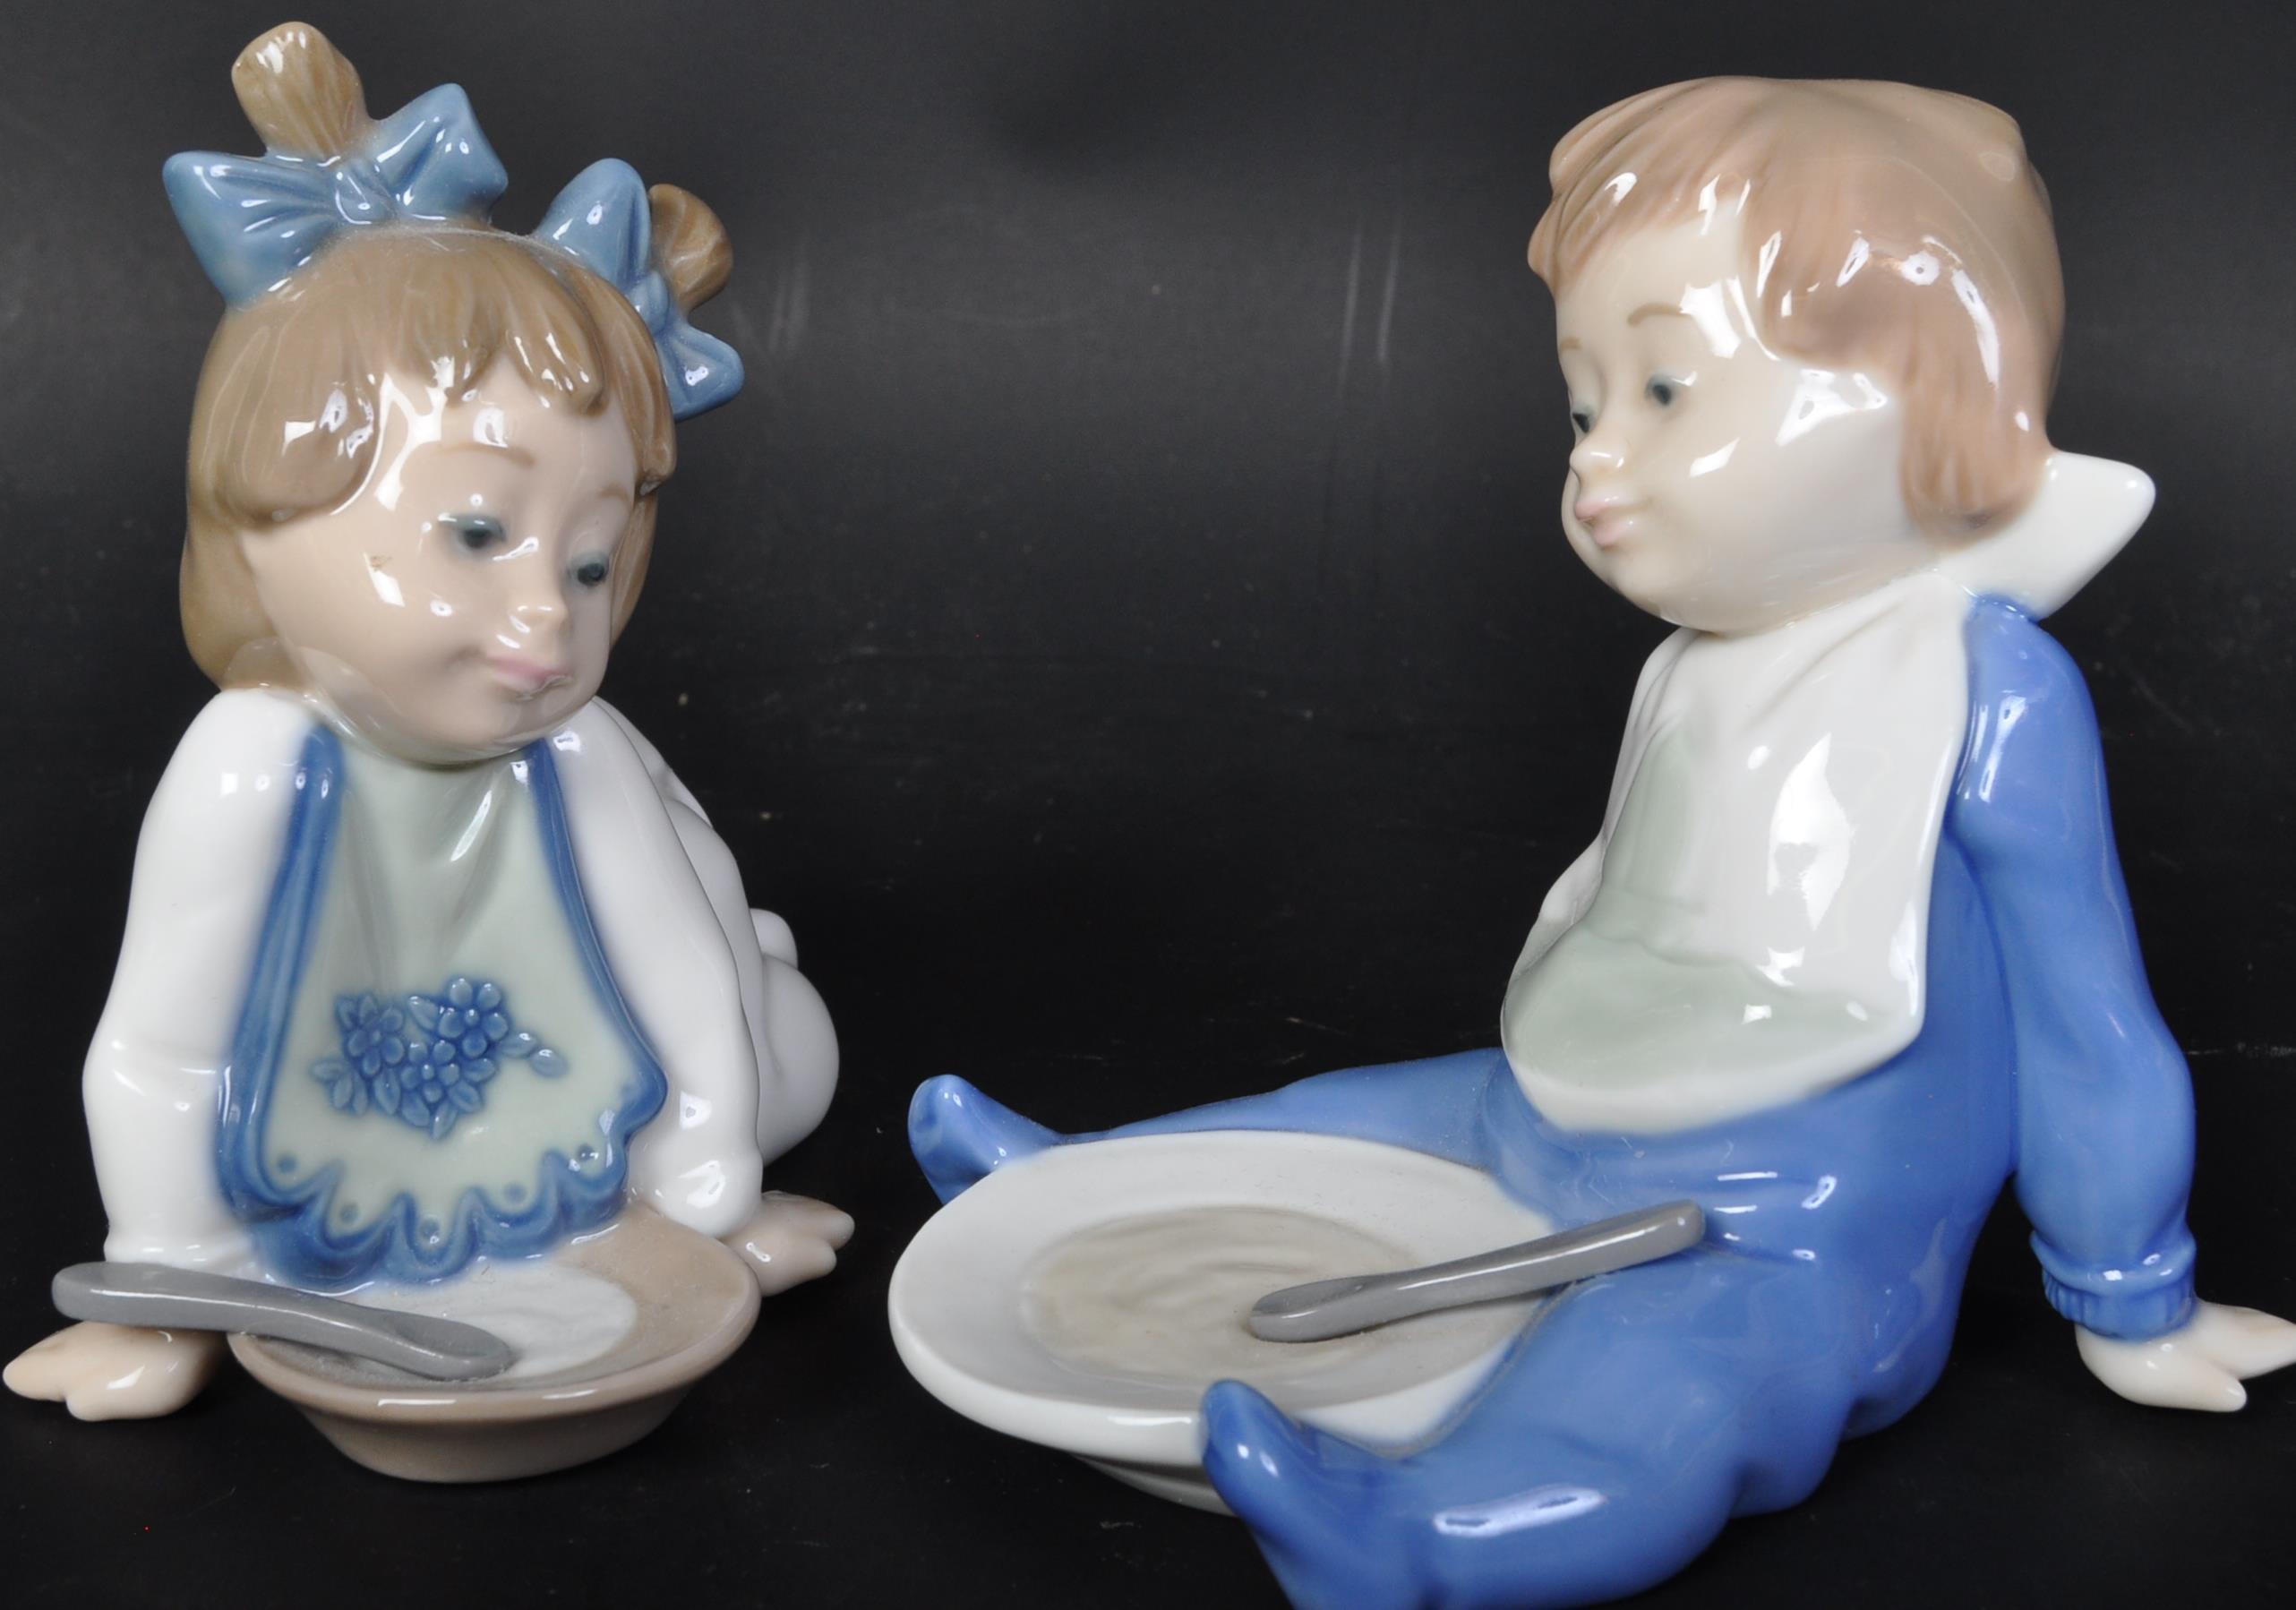 COLLECTION OF VINTAGE NAO BY LLADRO SPANISH PORCELAIN FIGURES - Image 4 of 5